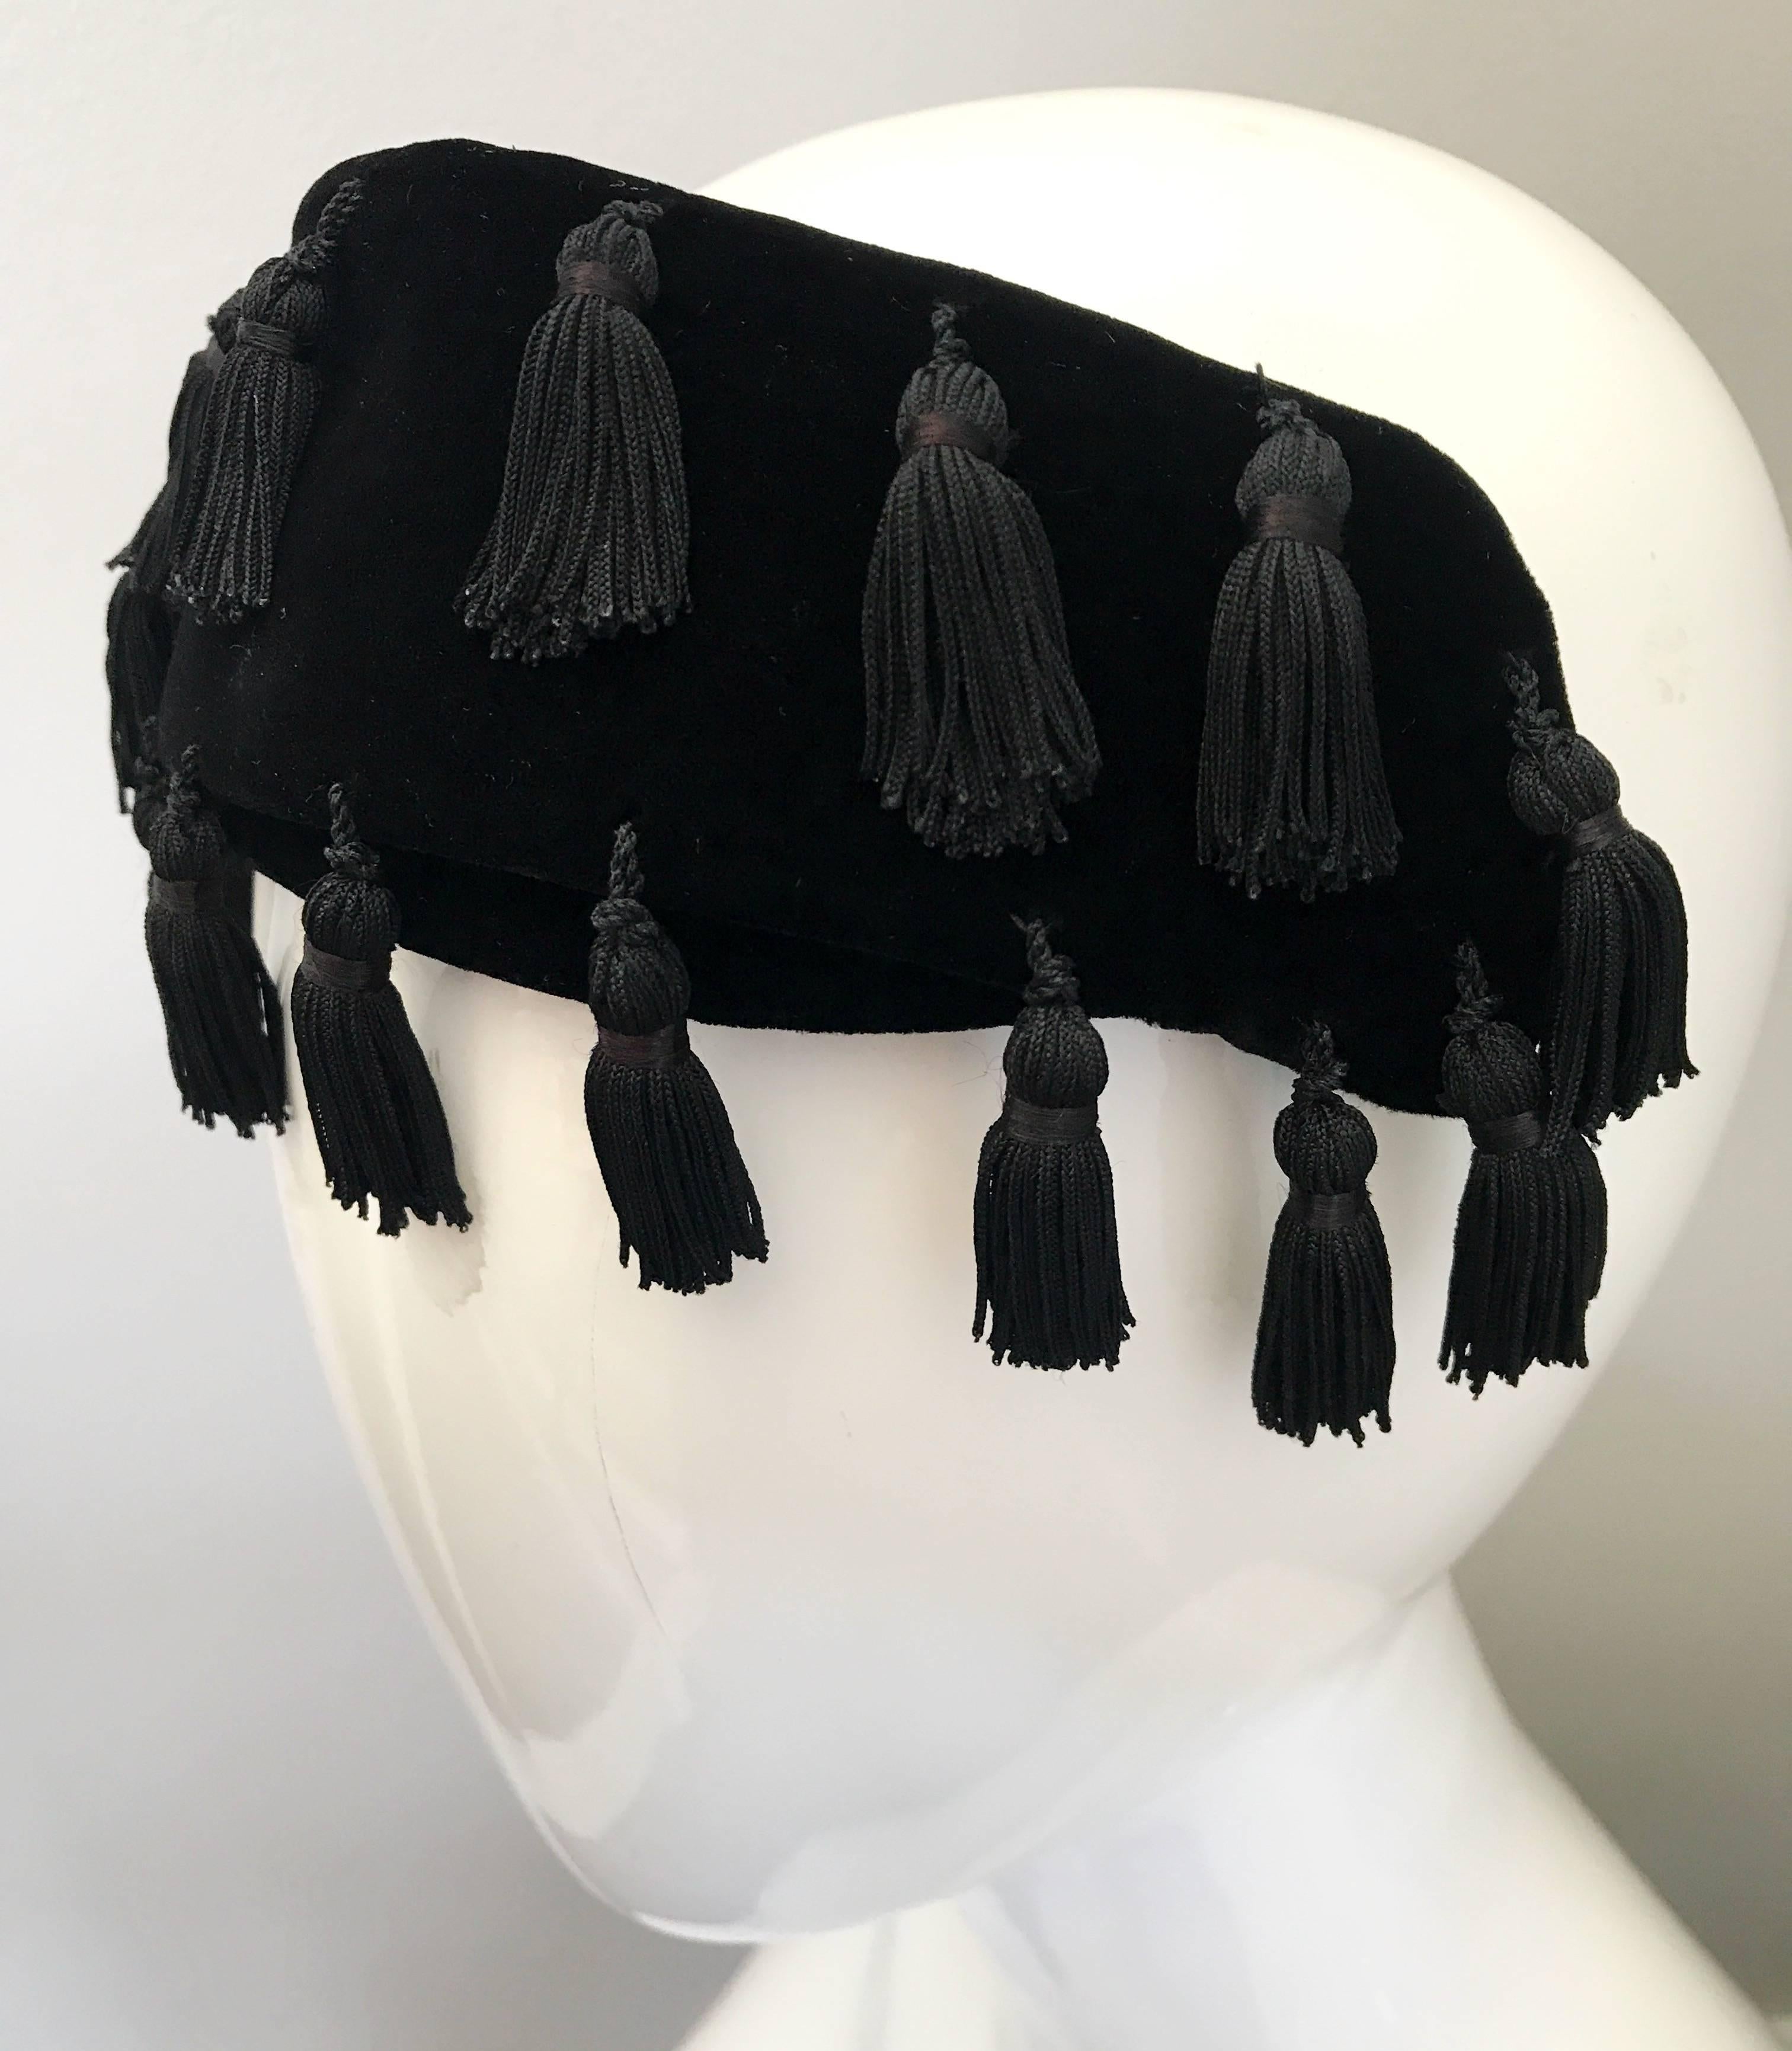 This 1950s NEIMAN MARCUS half hat fascinator is the perfect addition to an outfit! Black velvet, with about 20 tassels hand-sewn throughout. Can also be worn as a headband. Perfect with a dress, jeans, or a gown. Stretches to fit all head sizes. In